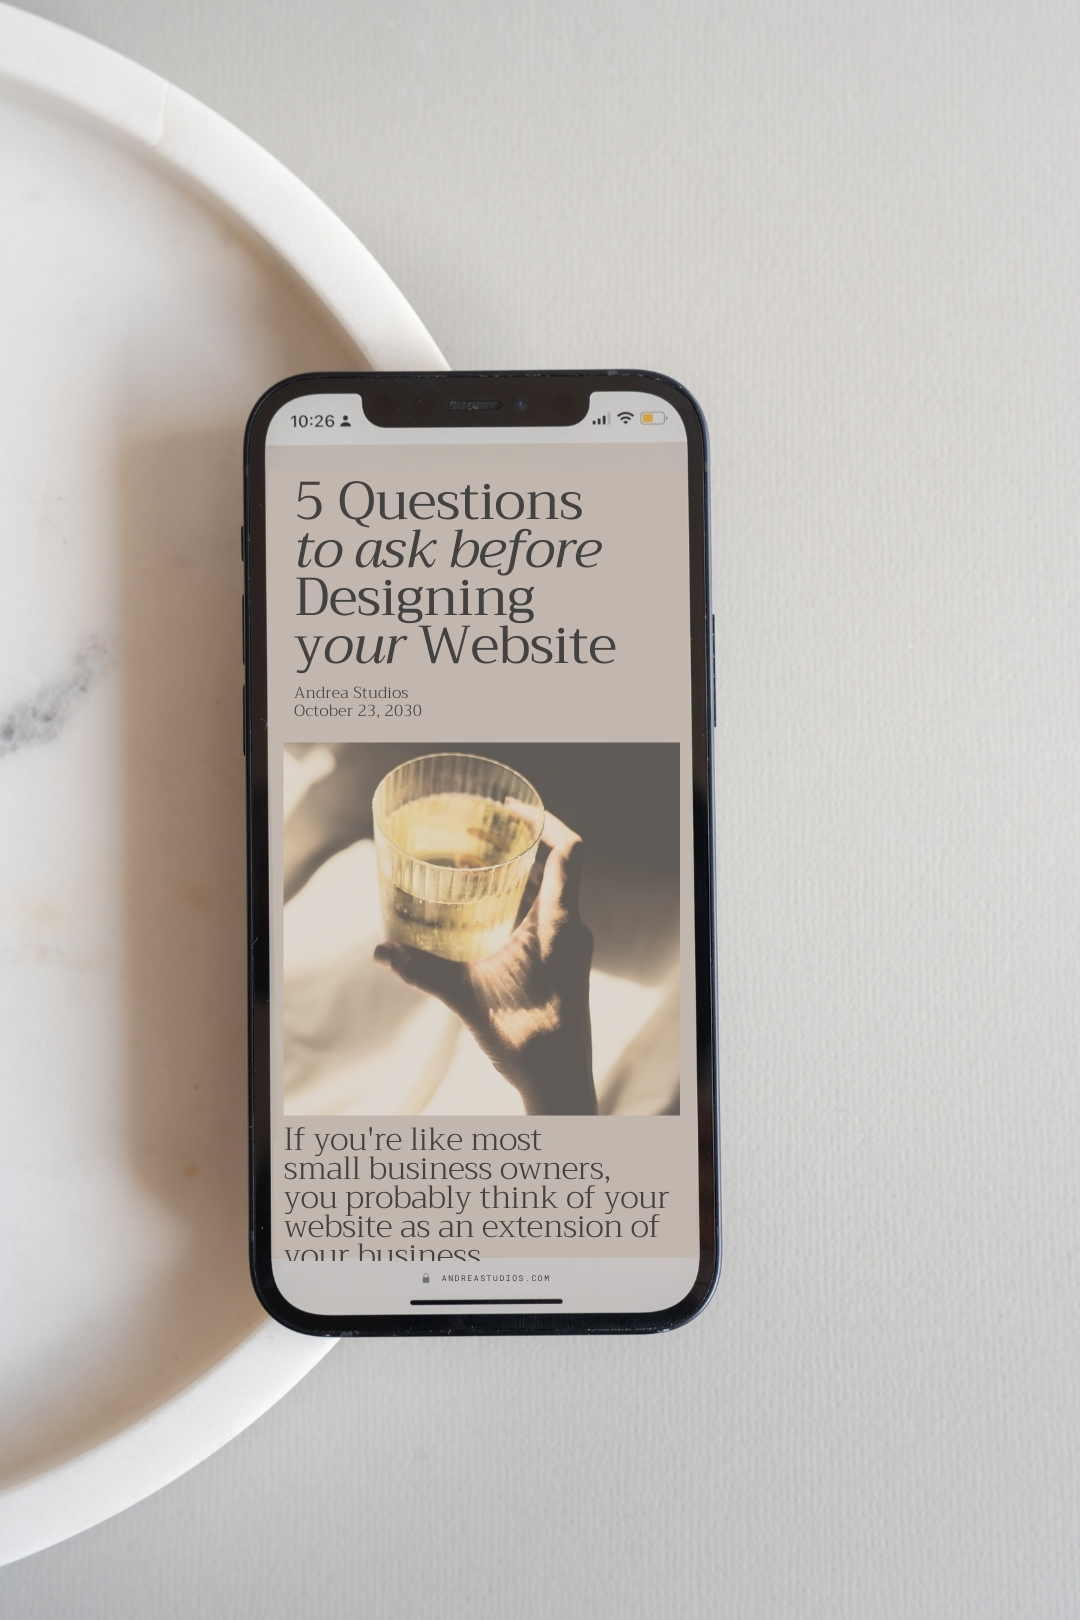 5 Questions to ask before Designing your Website